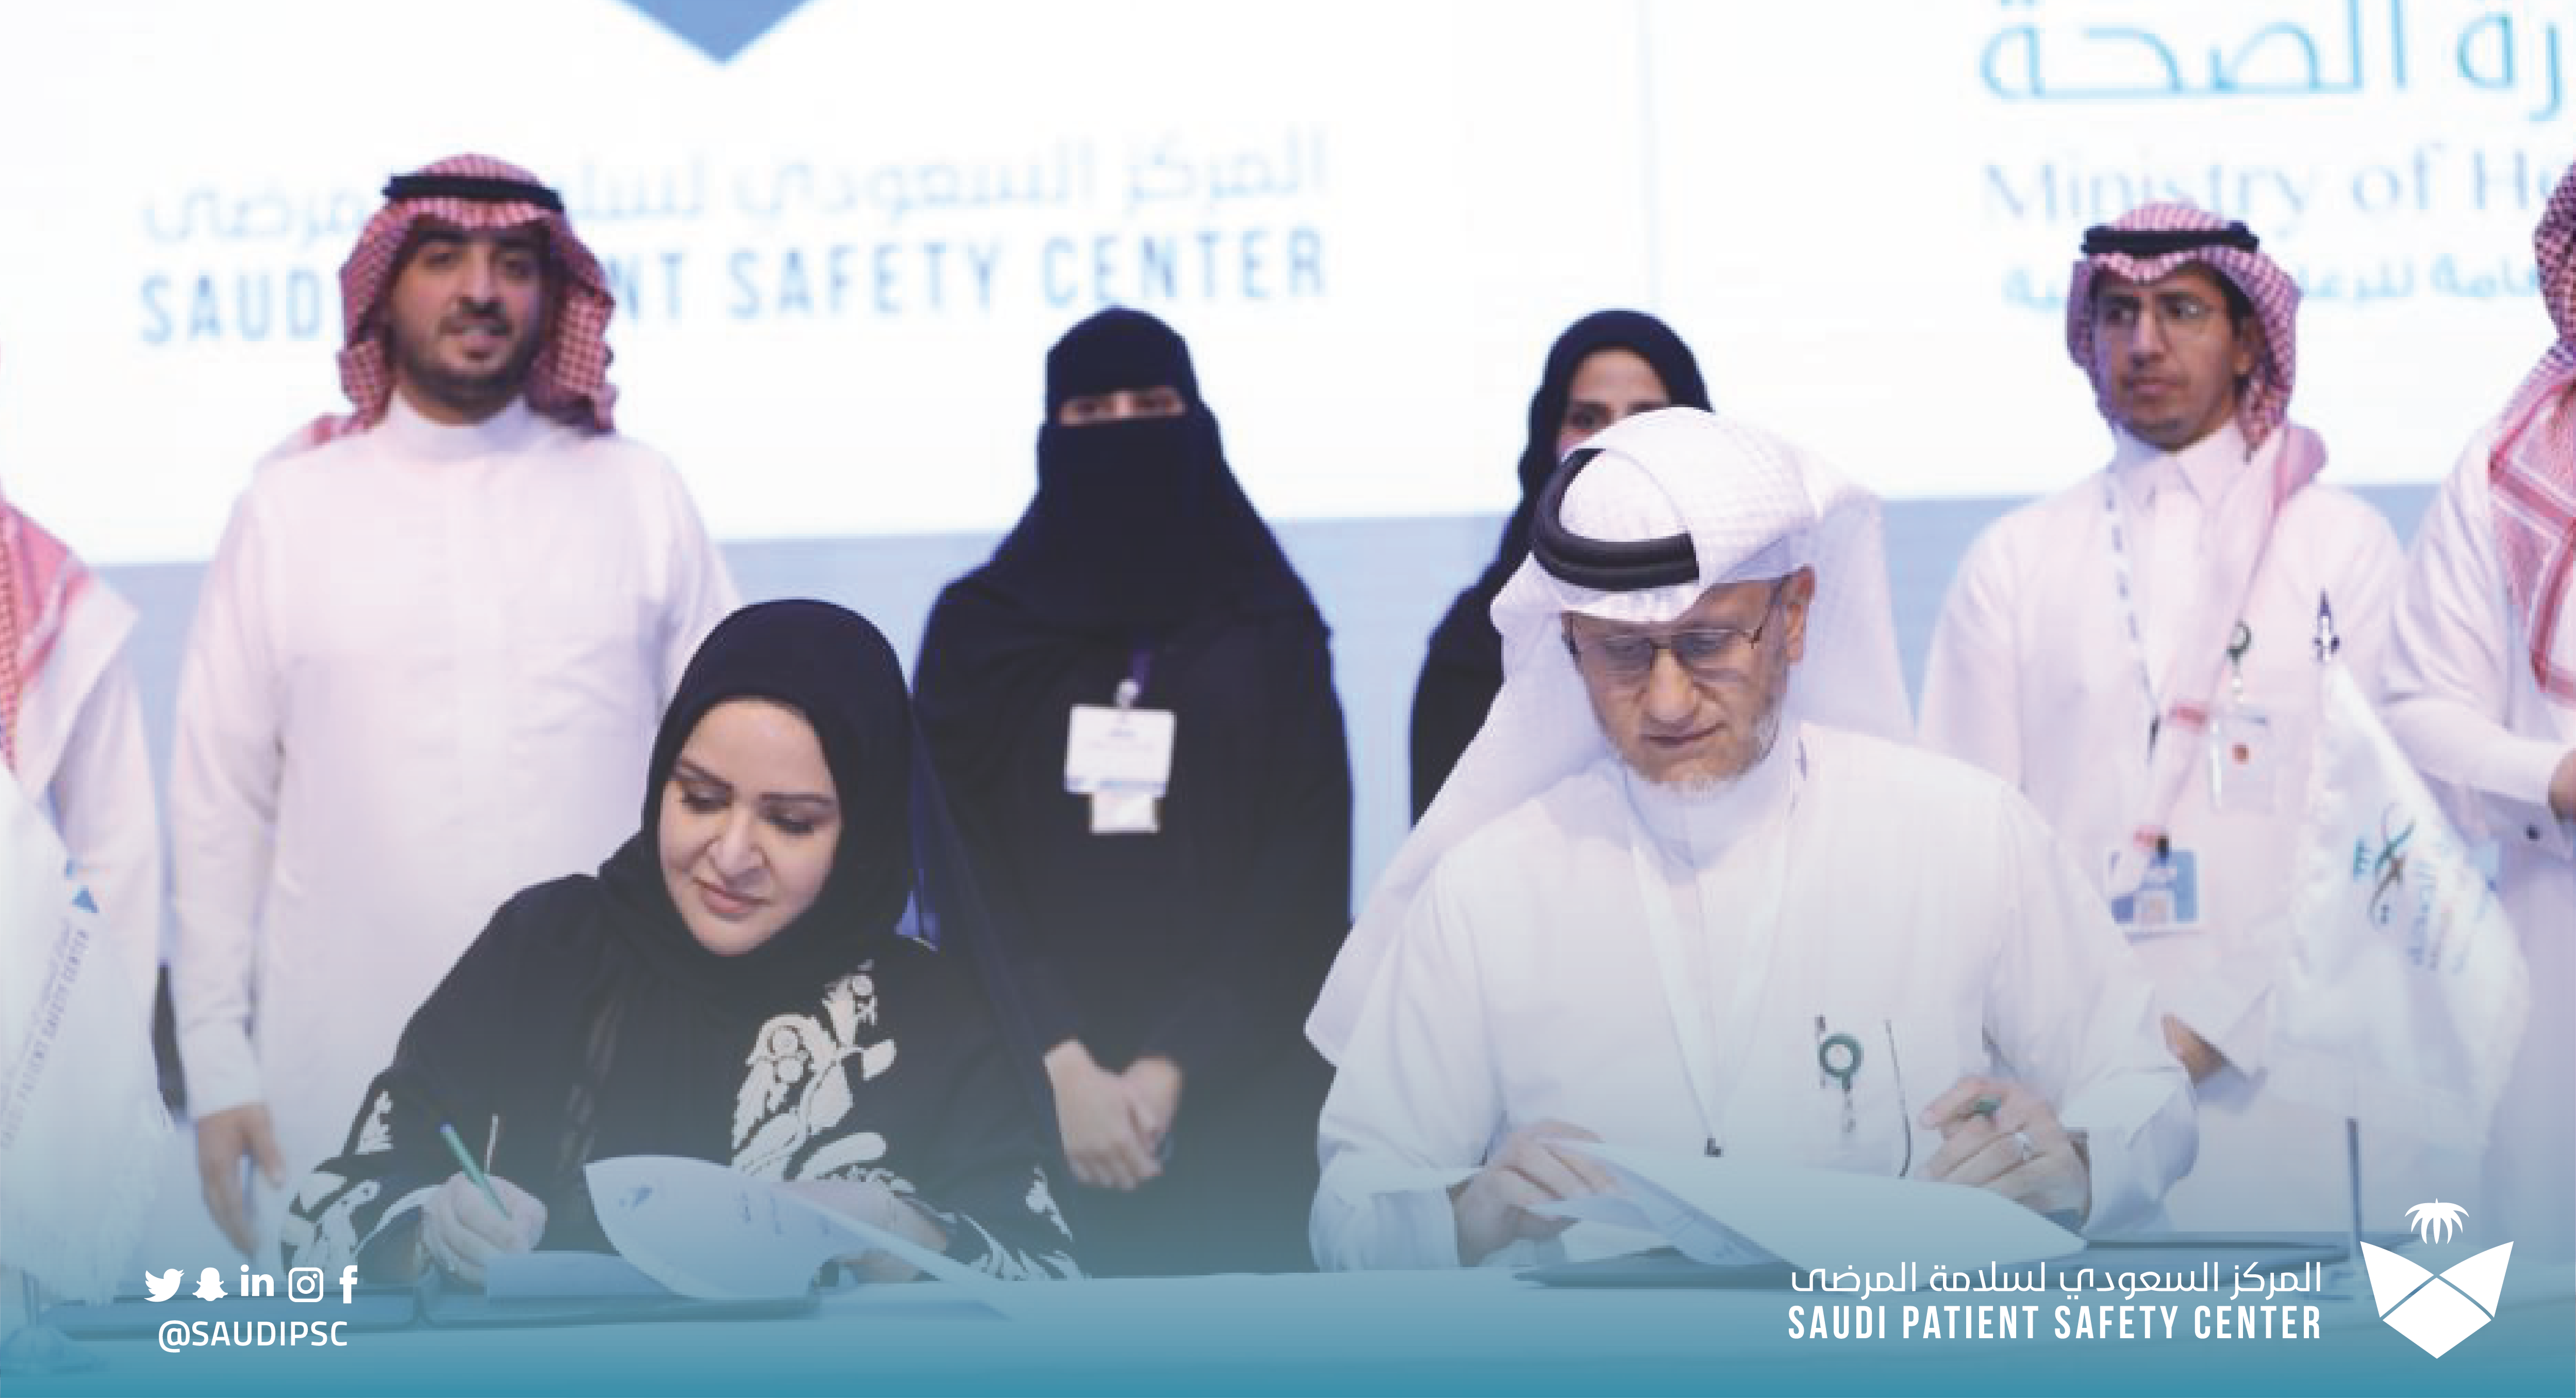 The Saudi Patient Safety Center and the General Administration of Pharmaceutical Care at the Ministry of Health signed a memorandum of understanding